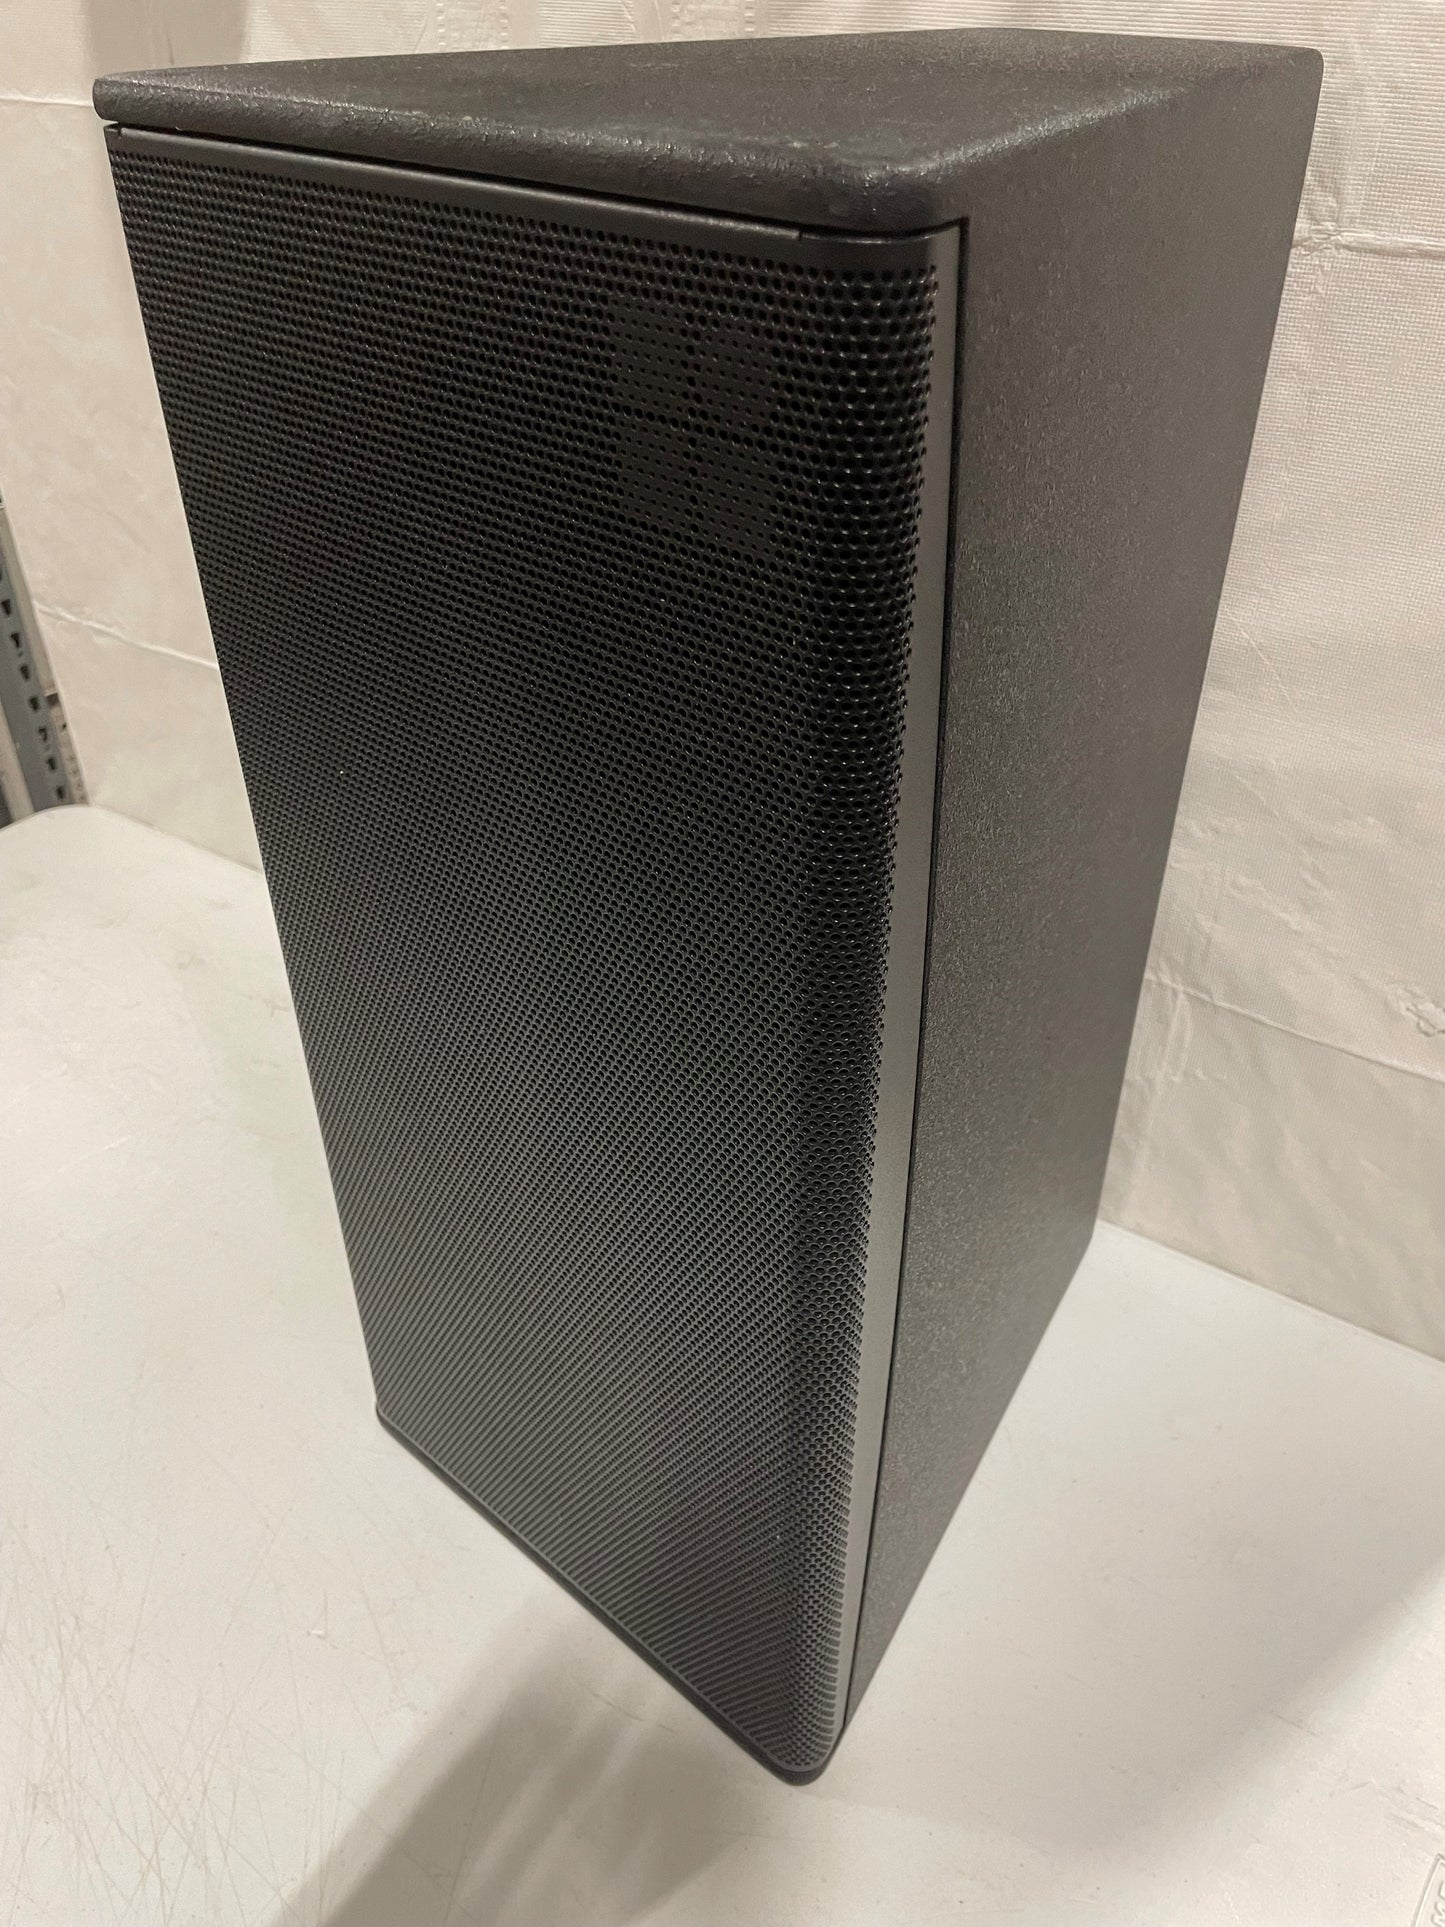 Pre-owned d&b 10S-D Speaker with Mounting Bracket for Sale. 					We Sell Professional Audio Equipment. Audio Systems, Amplifiers, Consoles, Mixers, Electronics, Entertainment, Sound, Live.